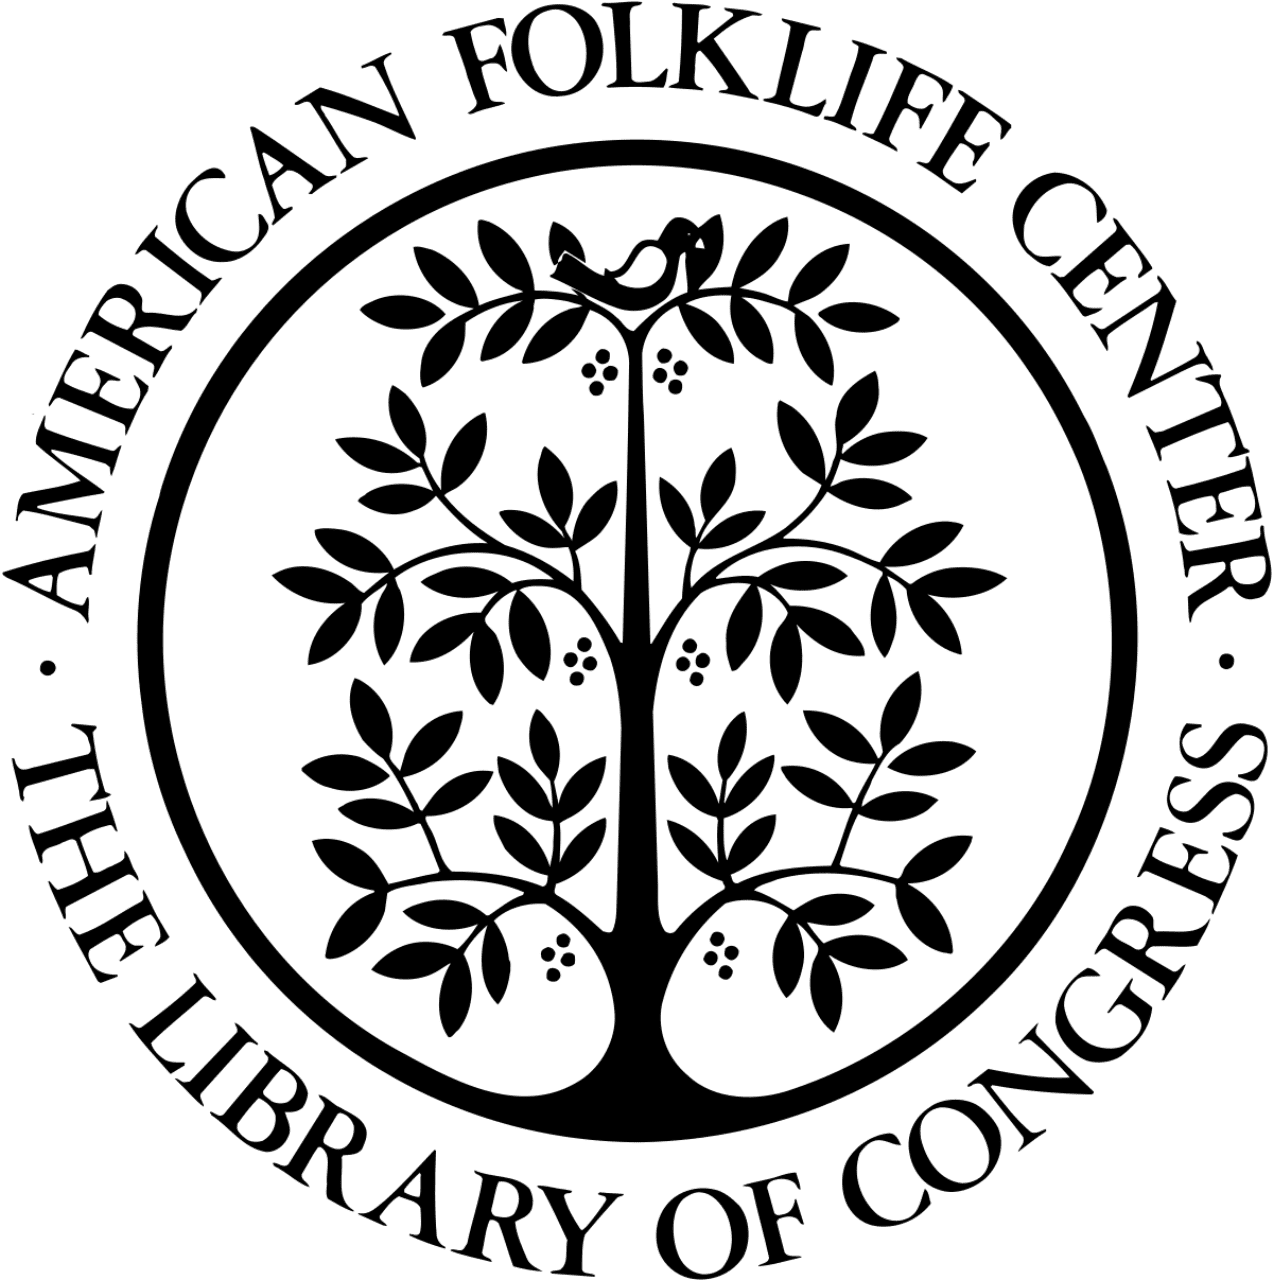 Library Of Congress Archive of Folk Songs